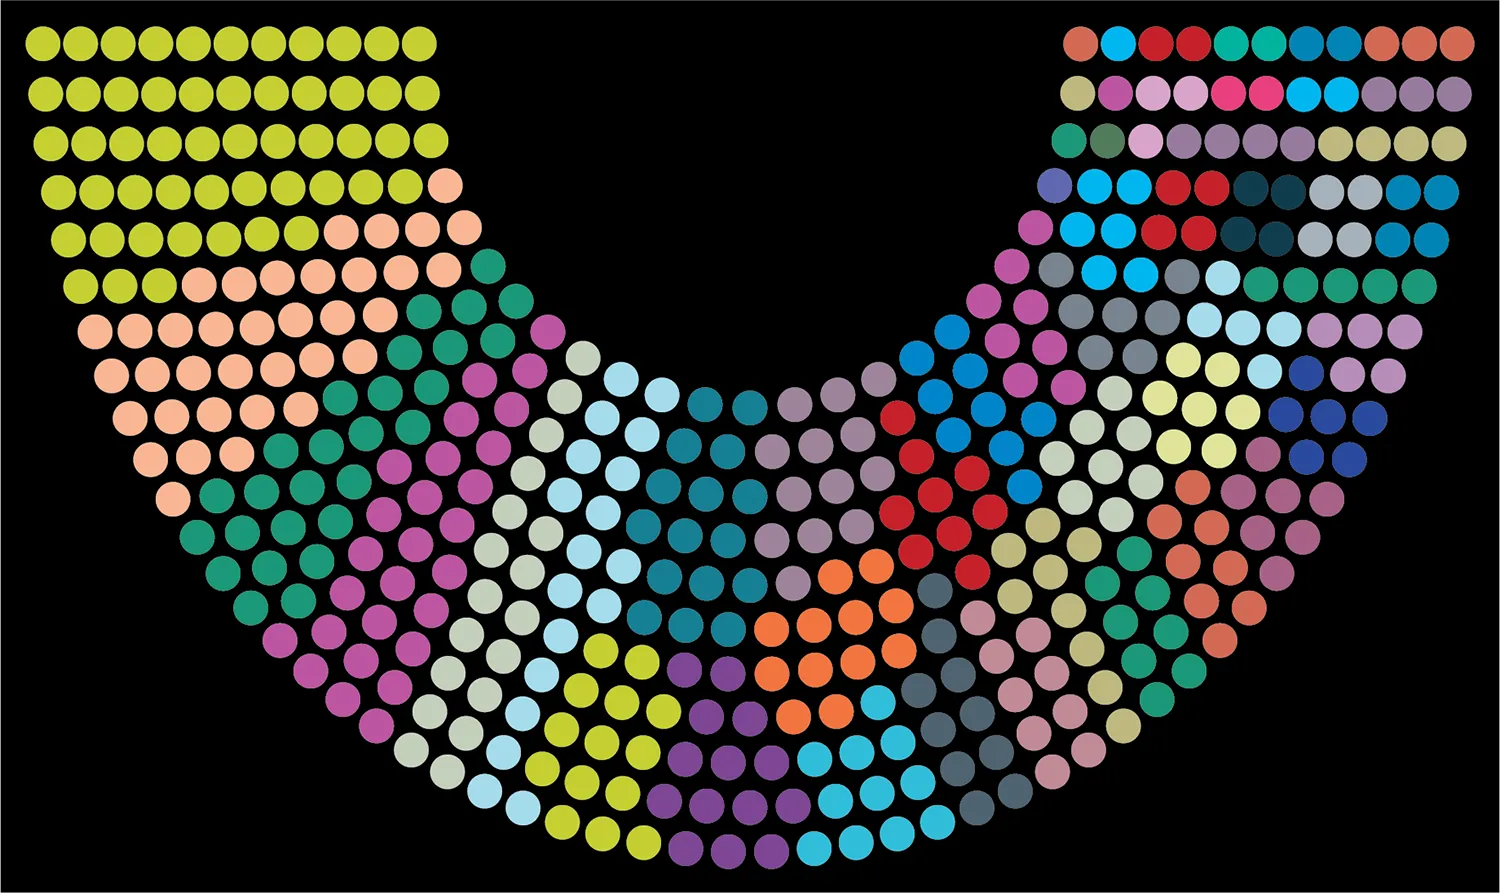 An illustration of a color palette shows the House of Representatives color-coded by state.